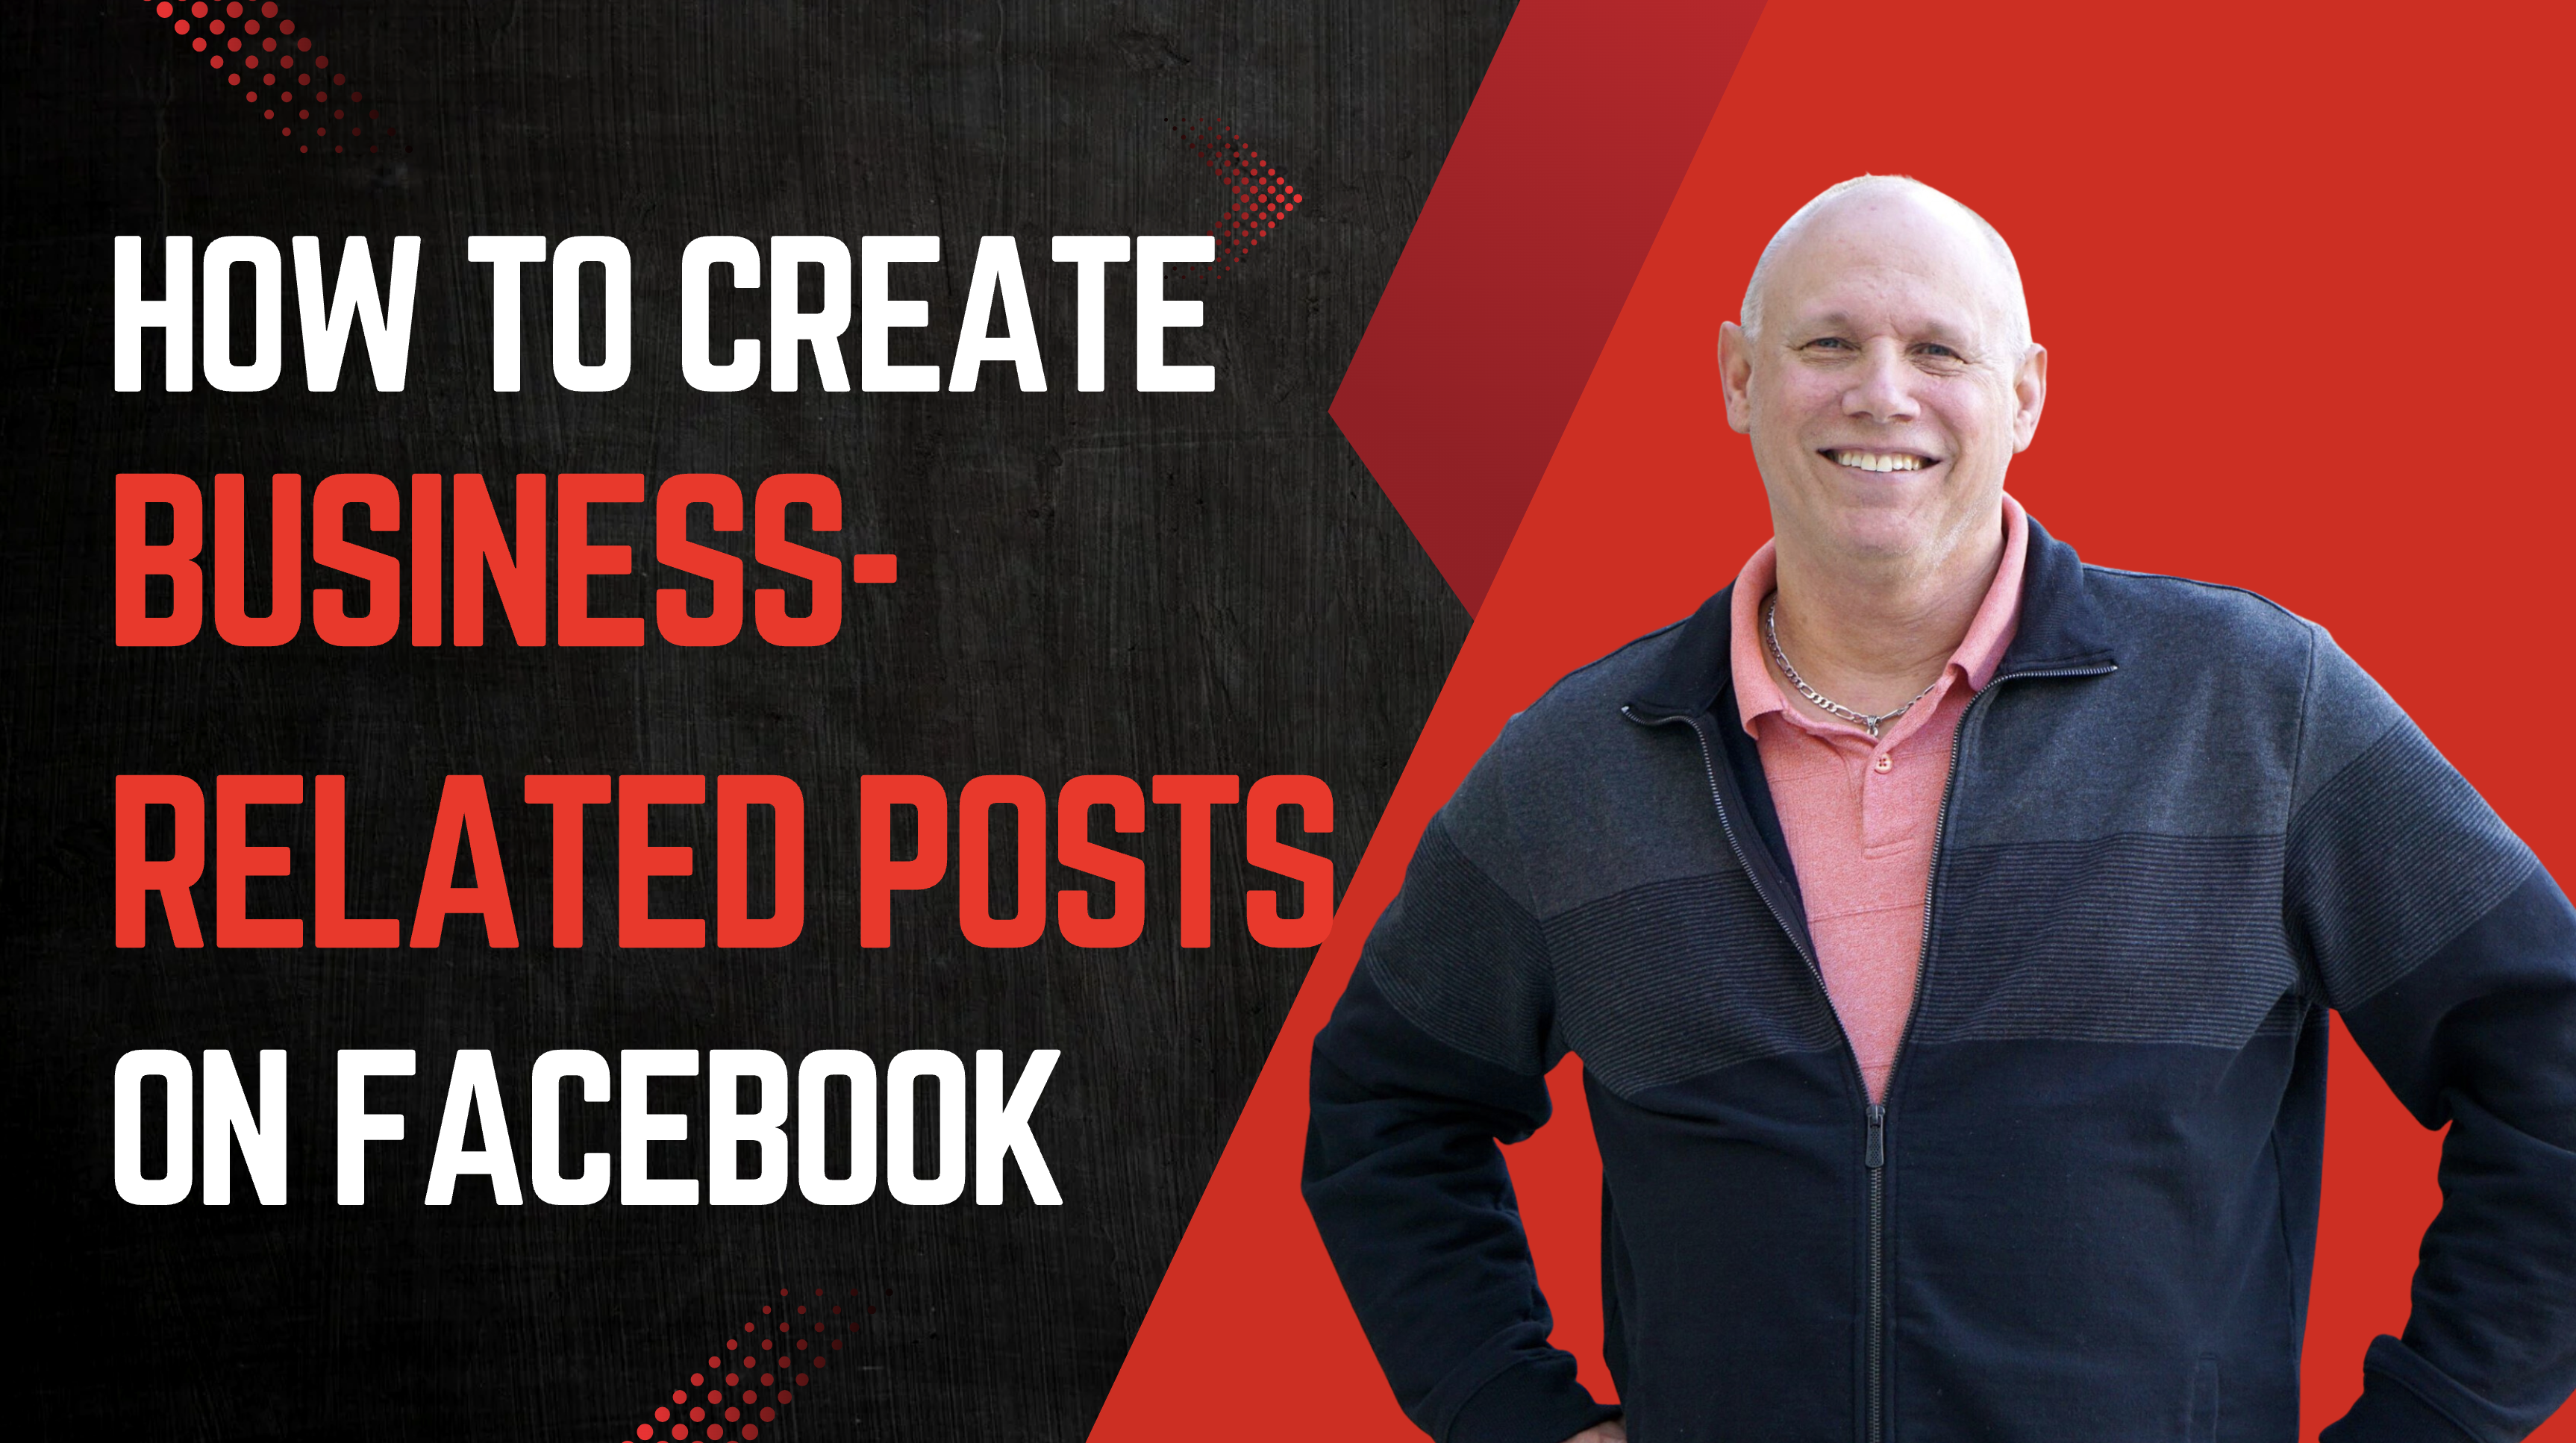 Business-Related Posts on Facebook